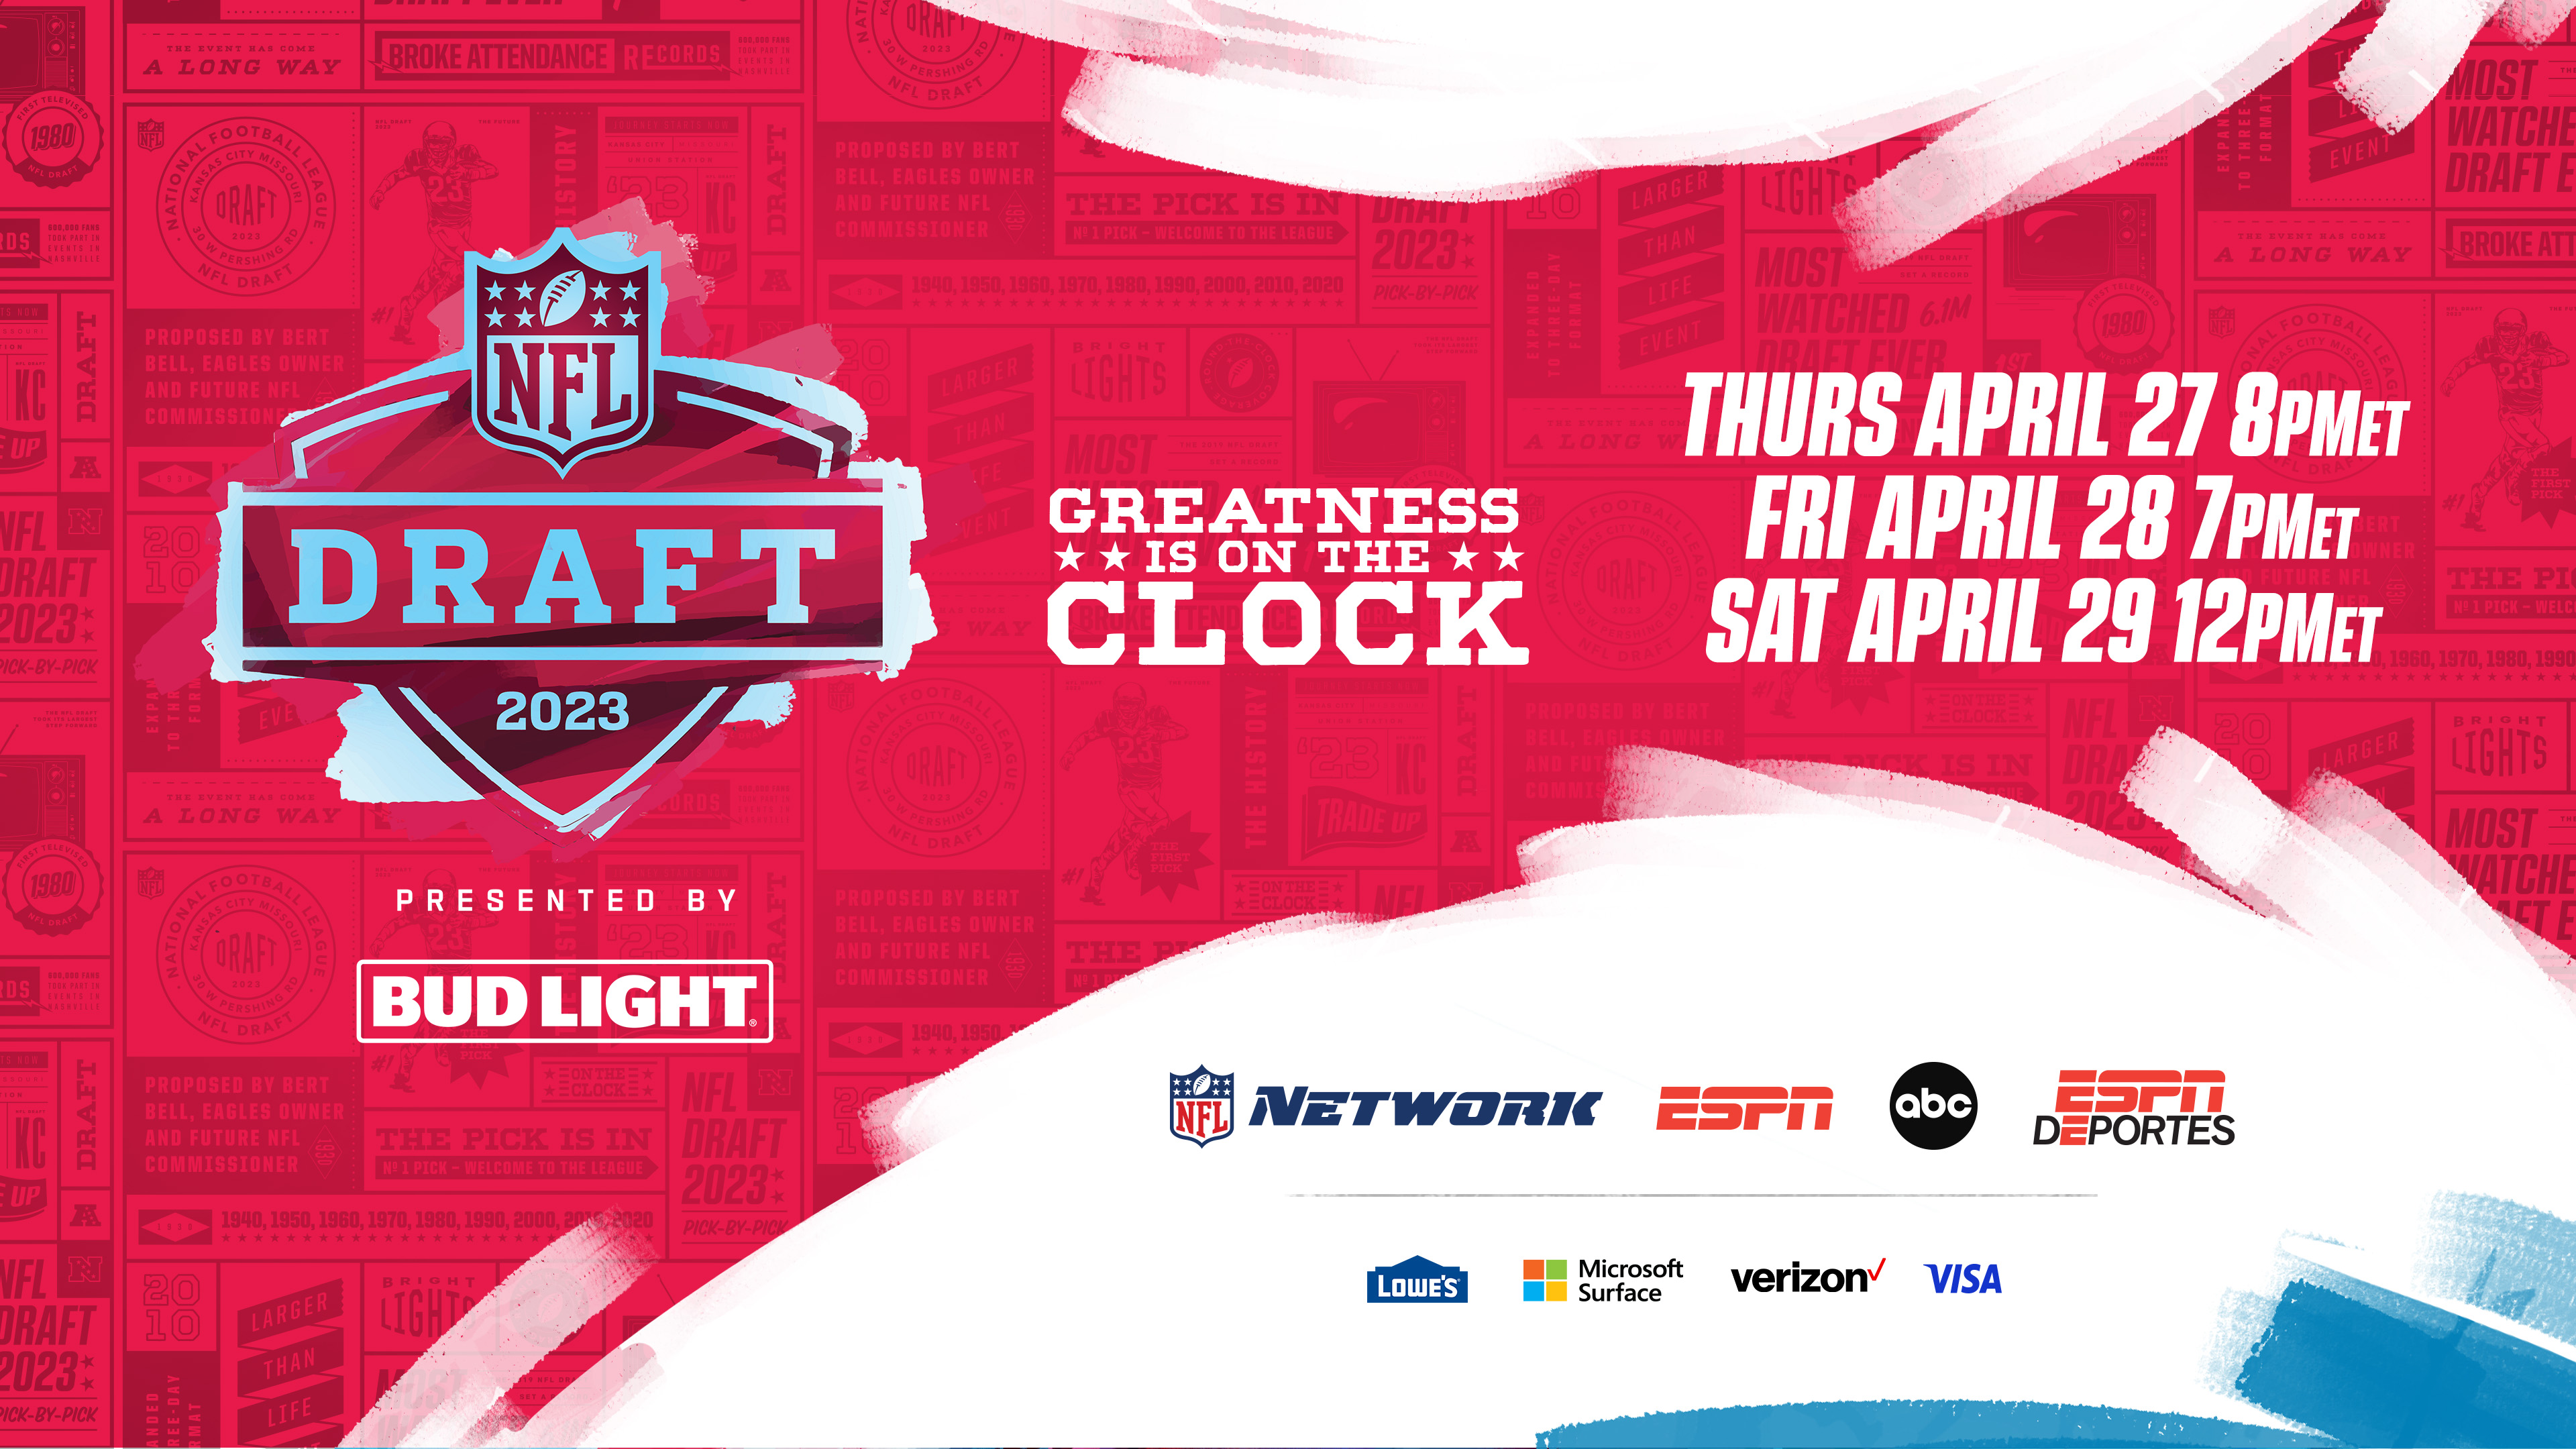 How to watch, listen & stream Giants coverage of the 2022 NFL Draft